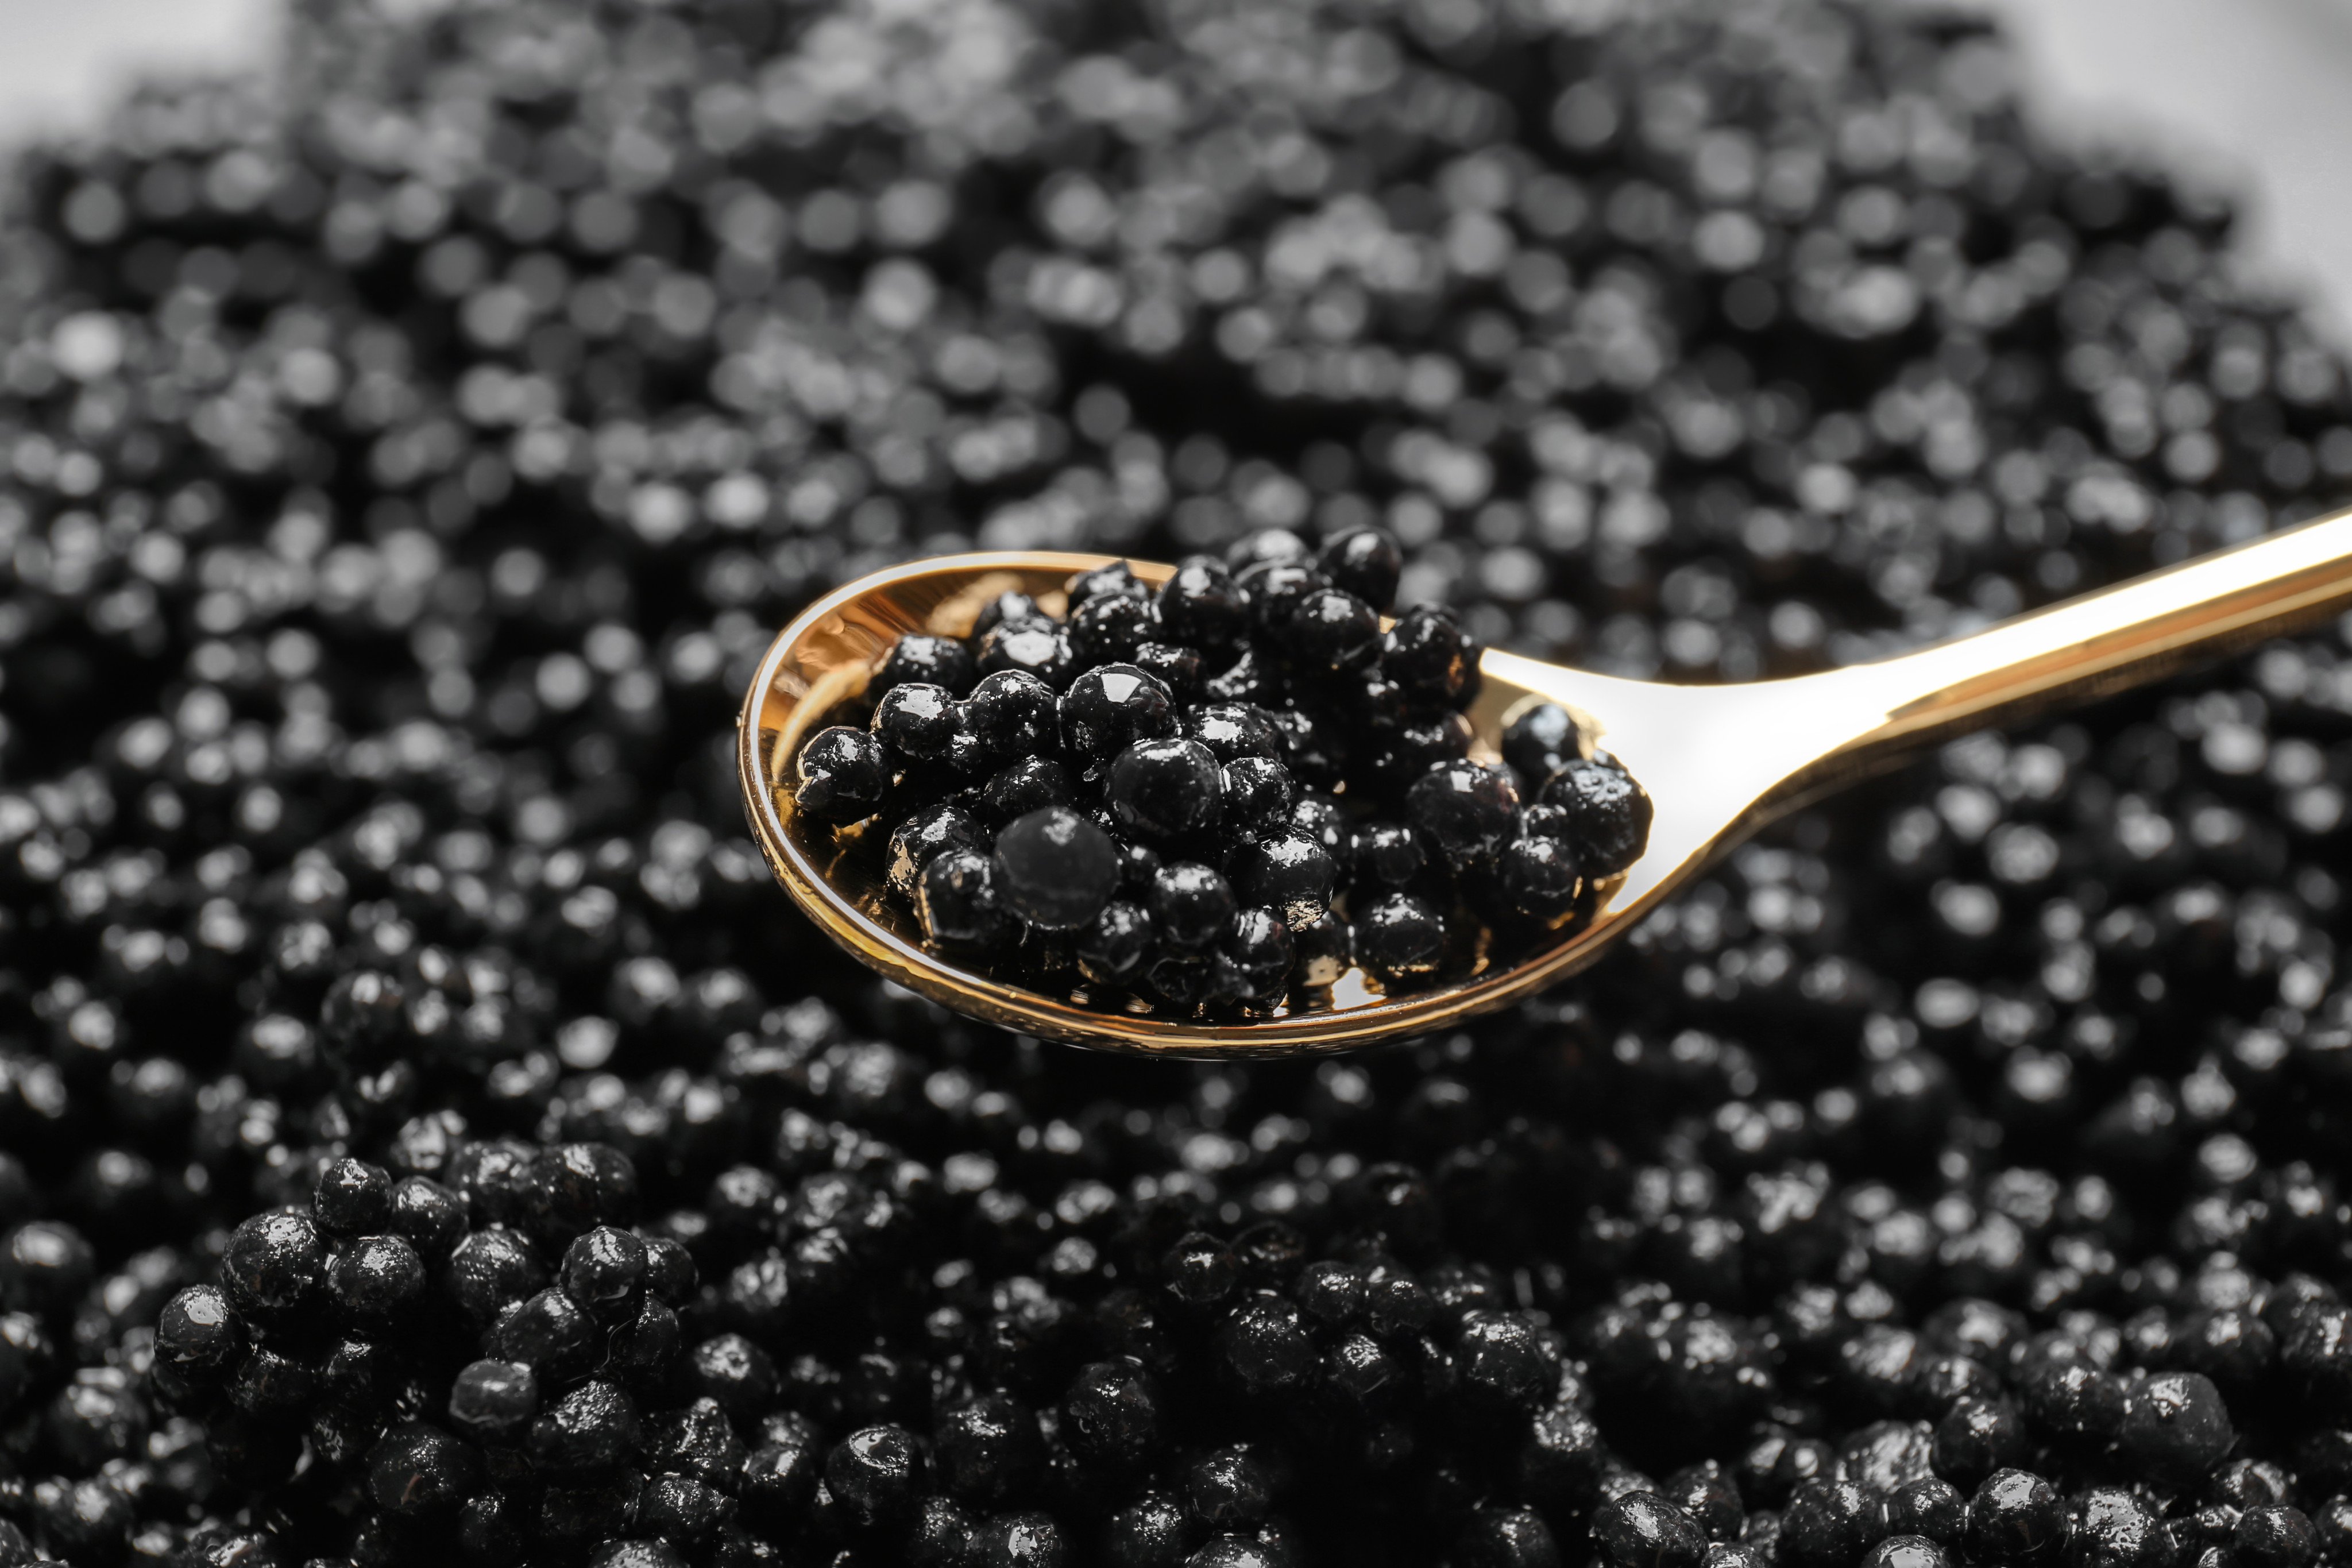 Black caviar is often served with vodka, but for an unusual pairing, why not try banana? Photo: Shutterstock